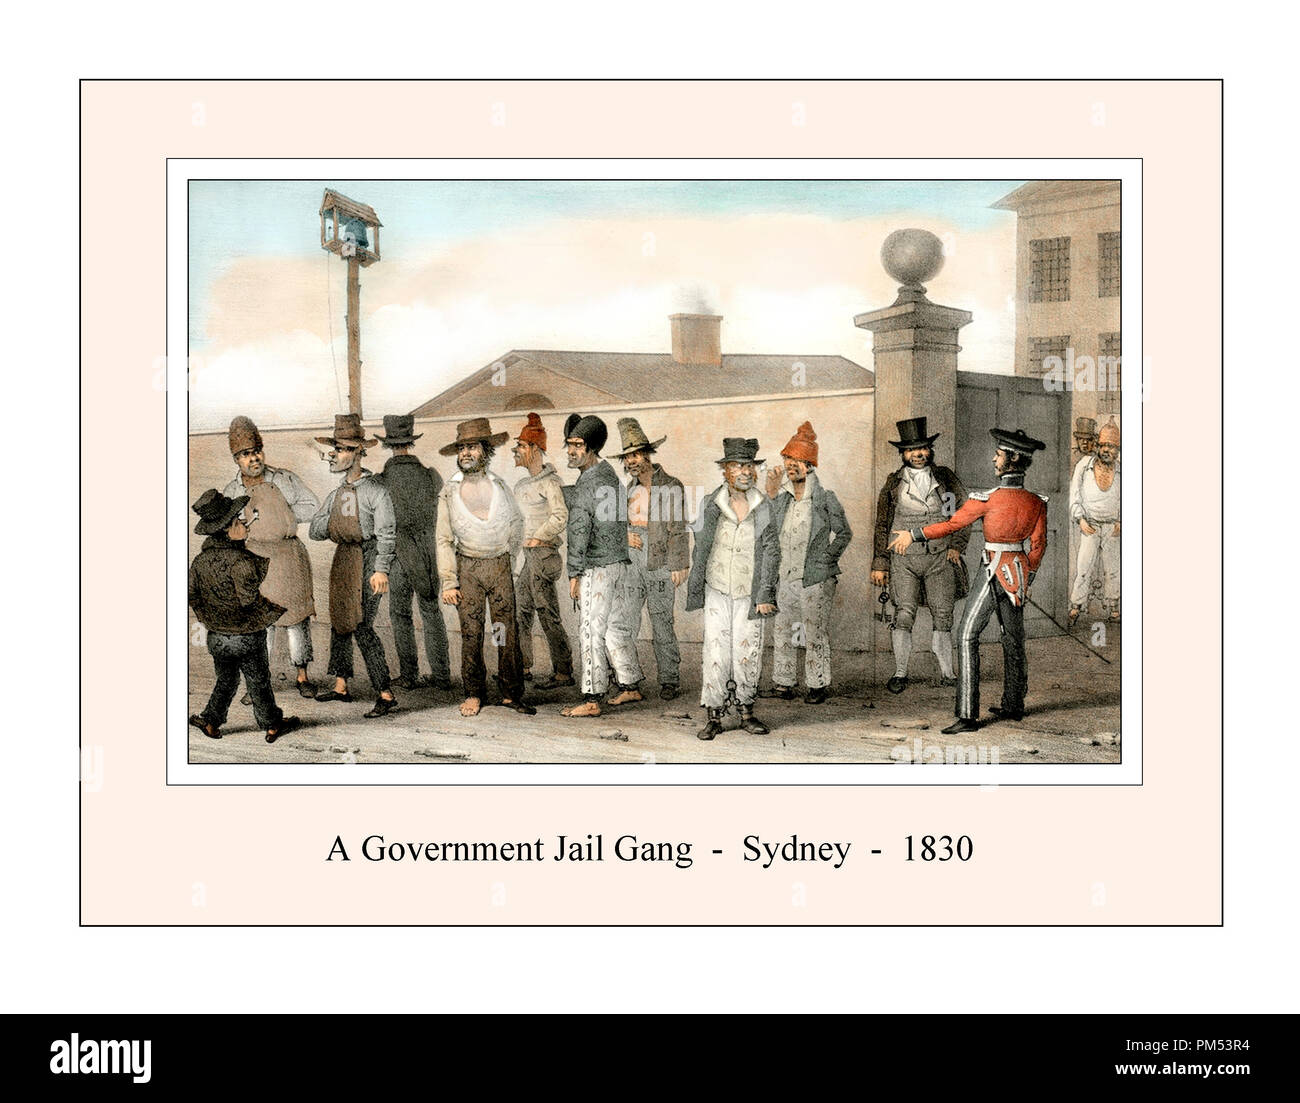 Sydney Convicts 1830 by Augustus Earle. Reset and refreshed Stock Photo